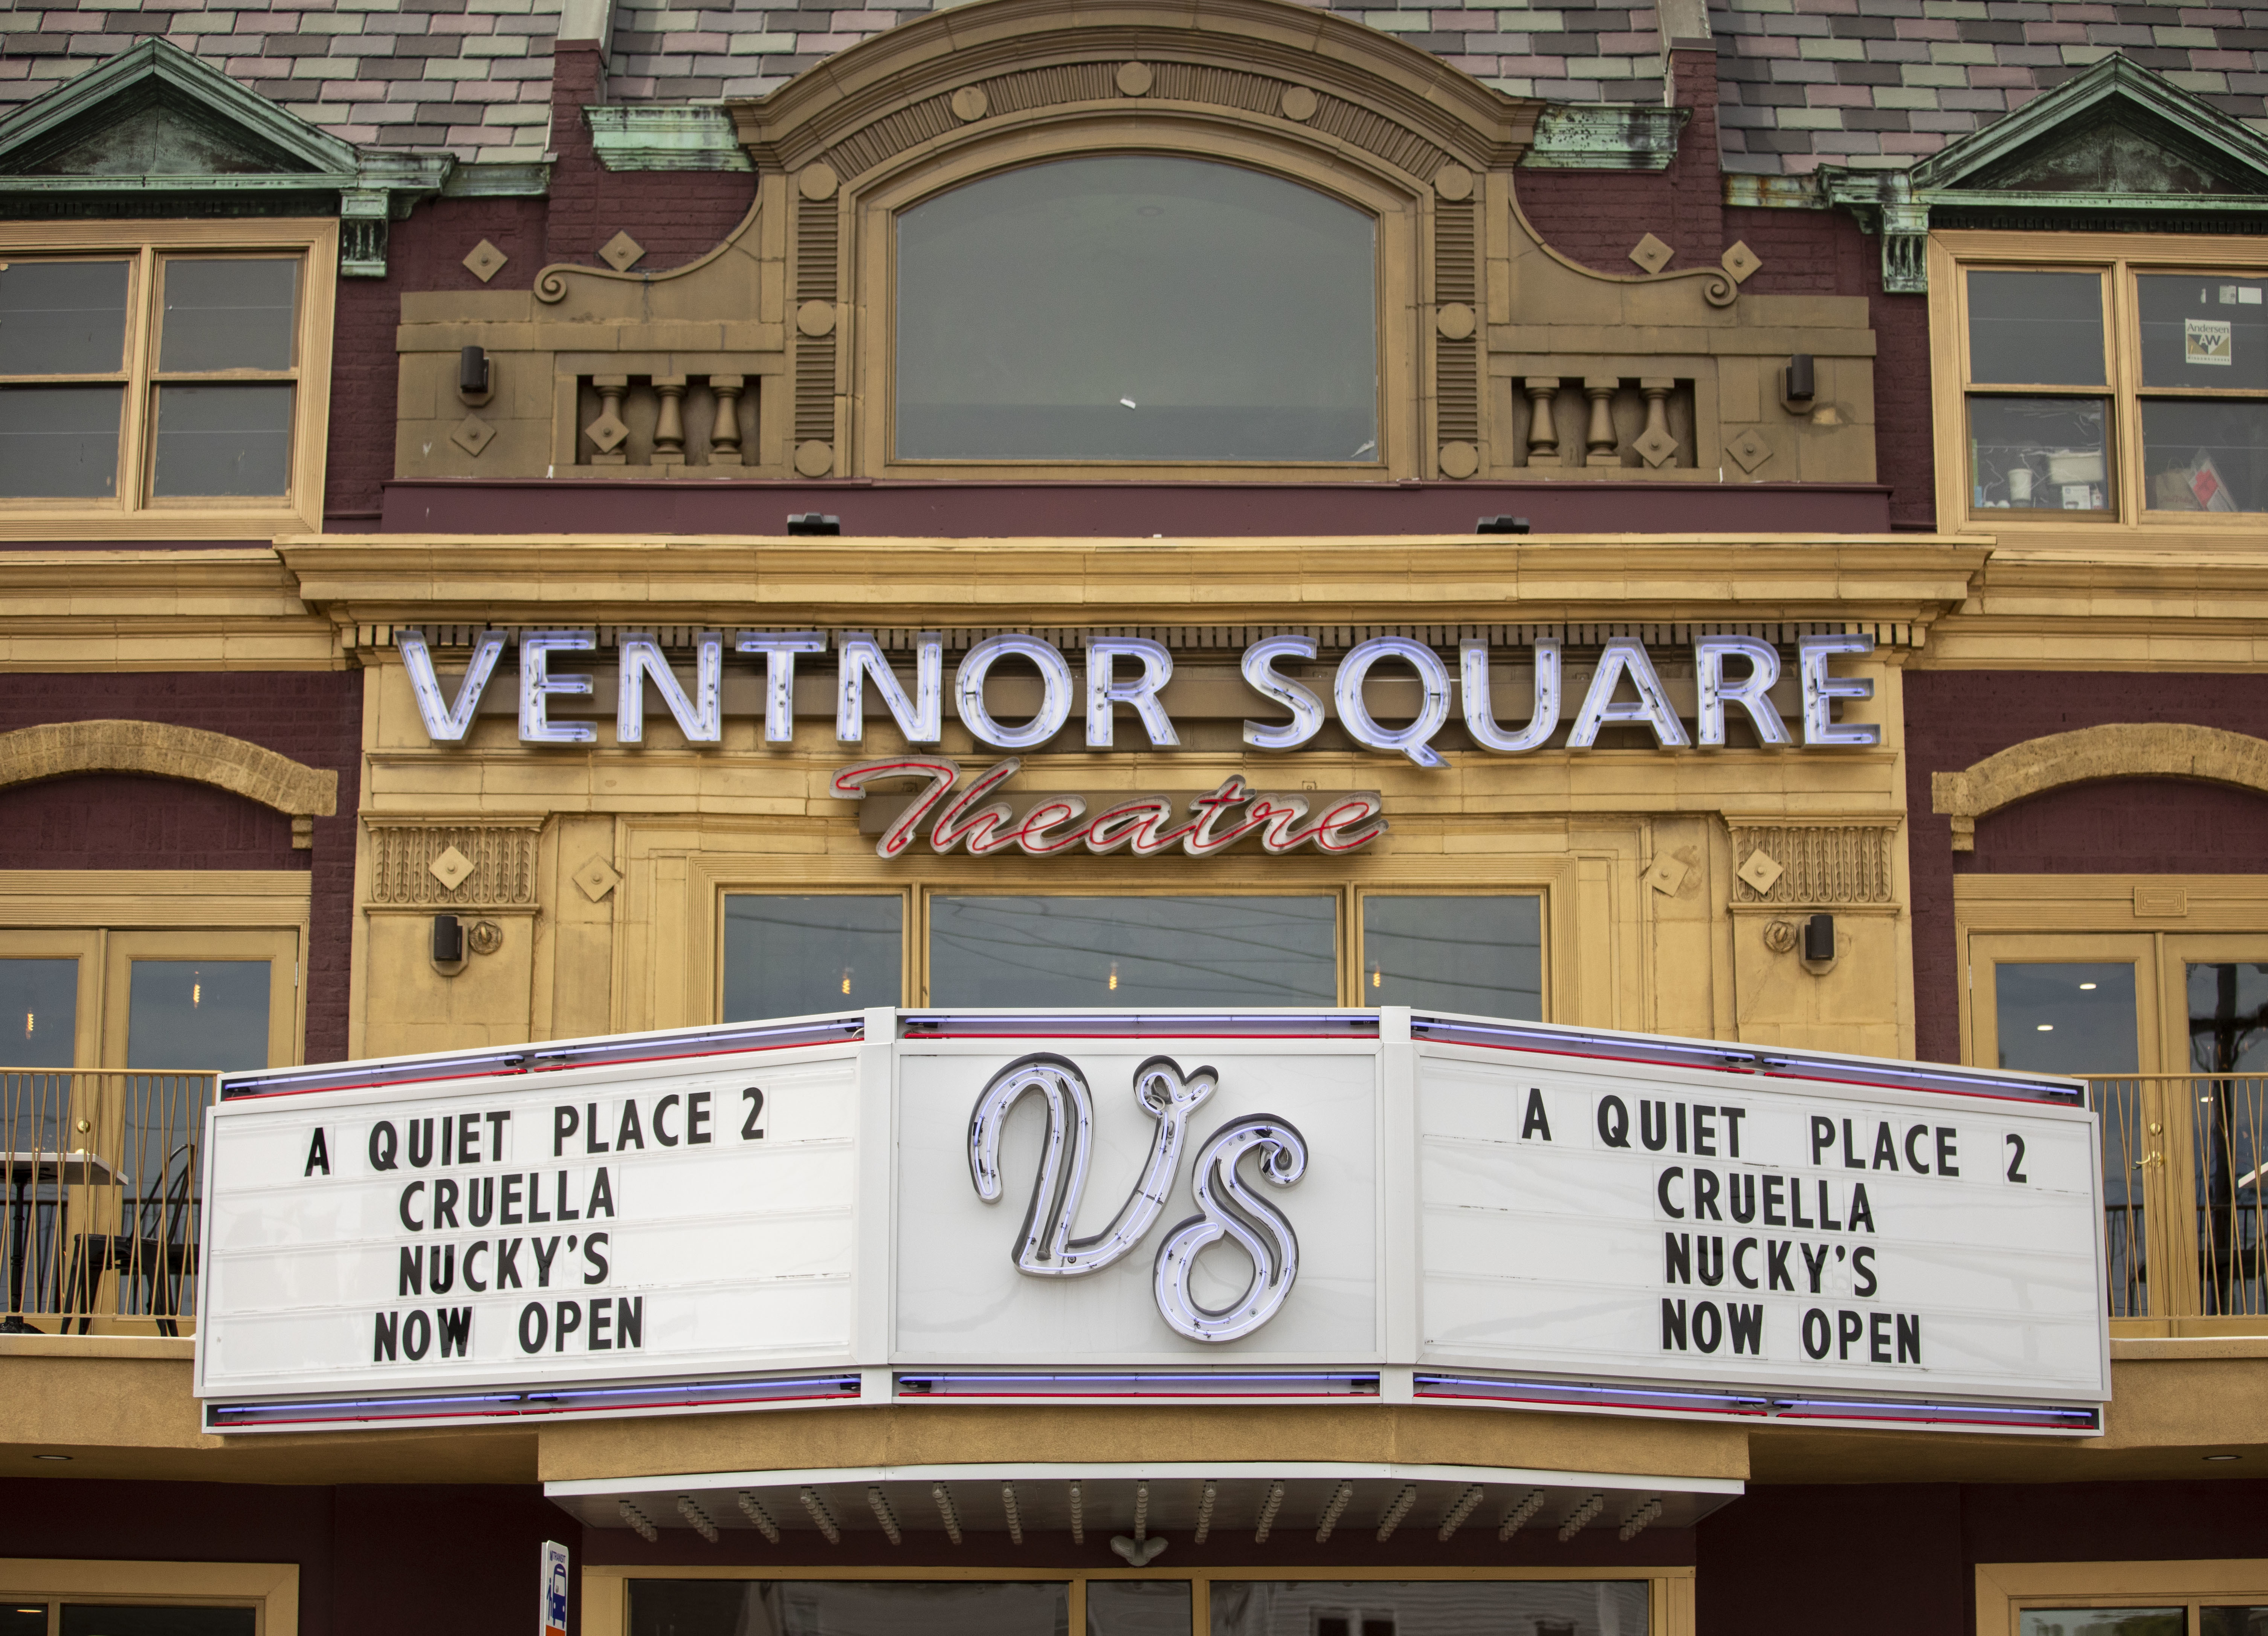 A Jersey Shore movie theater roared back to life in an unlikely saga image